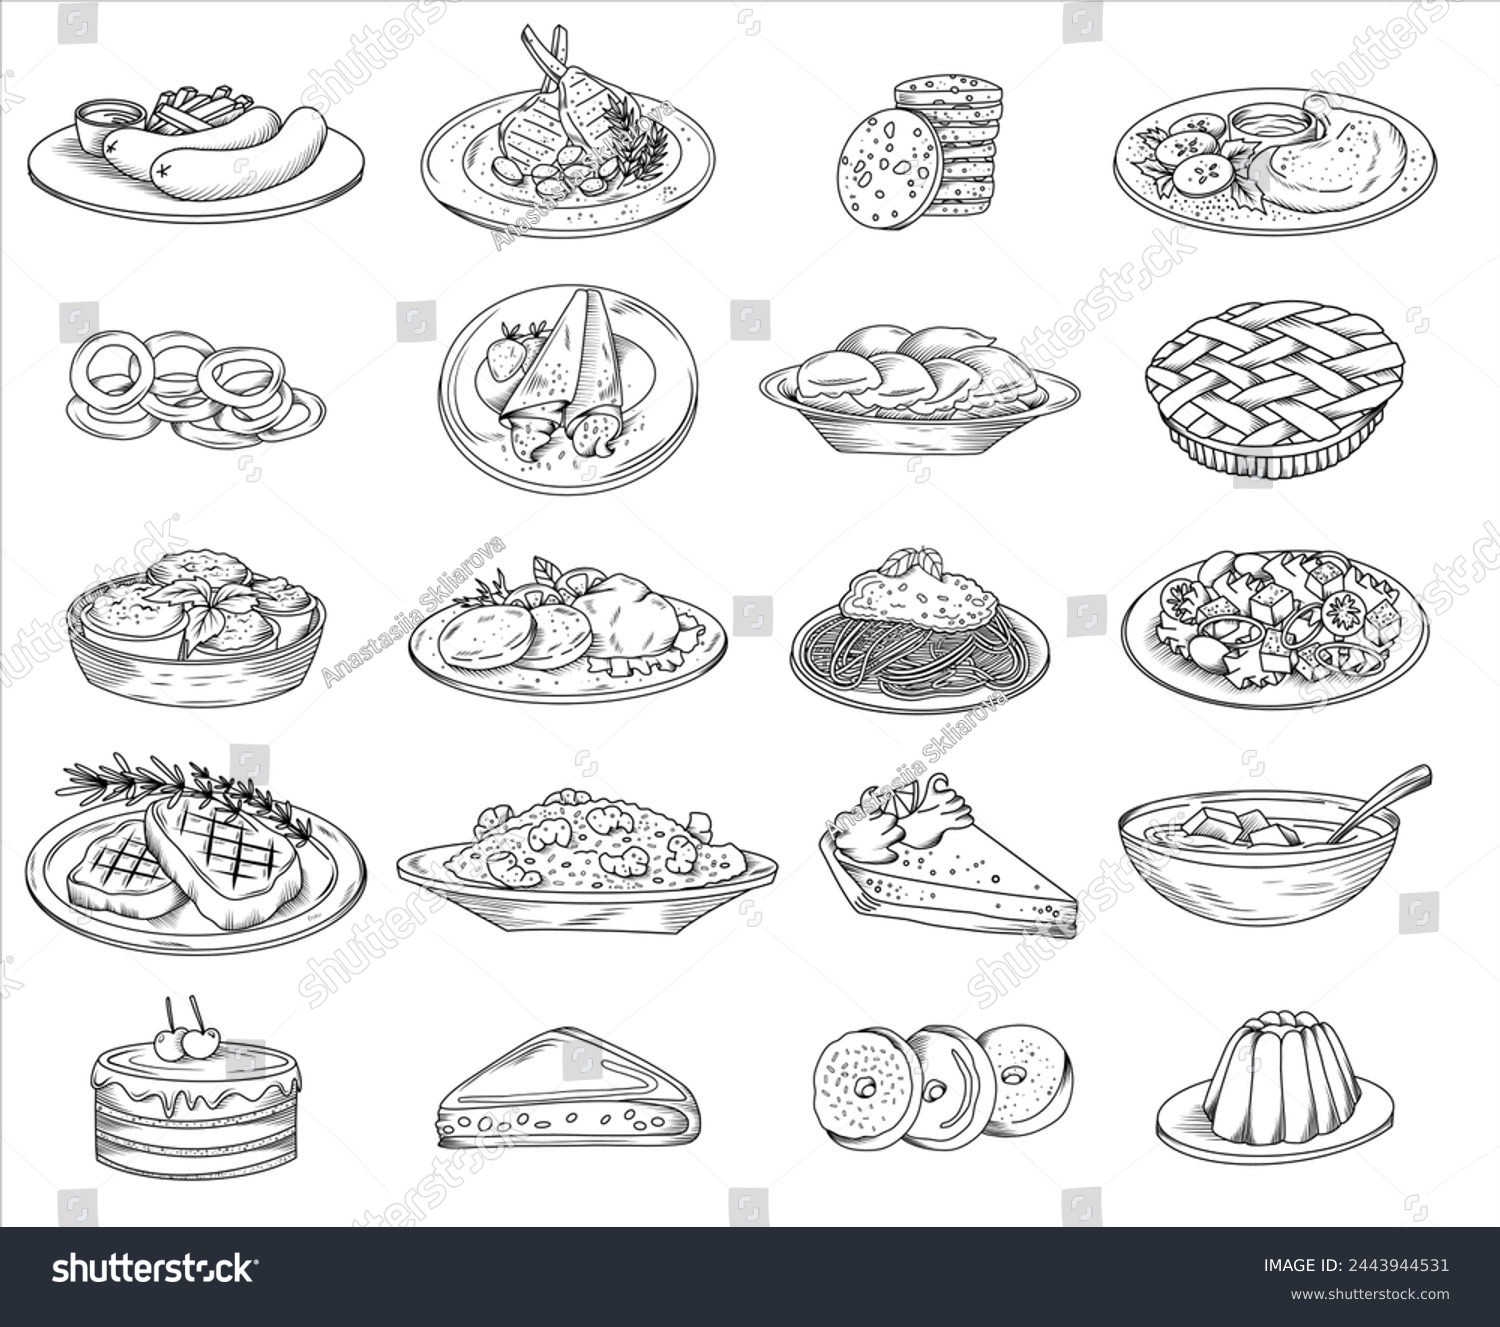 SVG of Set of hand drawn culinary dishes illustration (pancakes, sausages, risotto, steak, pie, dumplings, cake, Greek salad, cutlets, spaghetti, soup etc), vector sketch isolated illustration of food svg